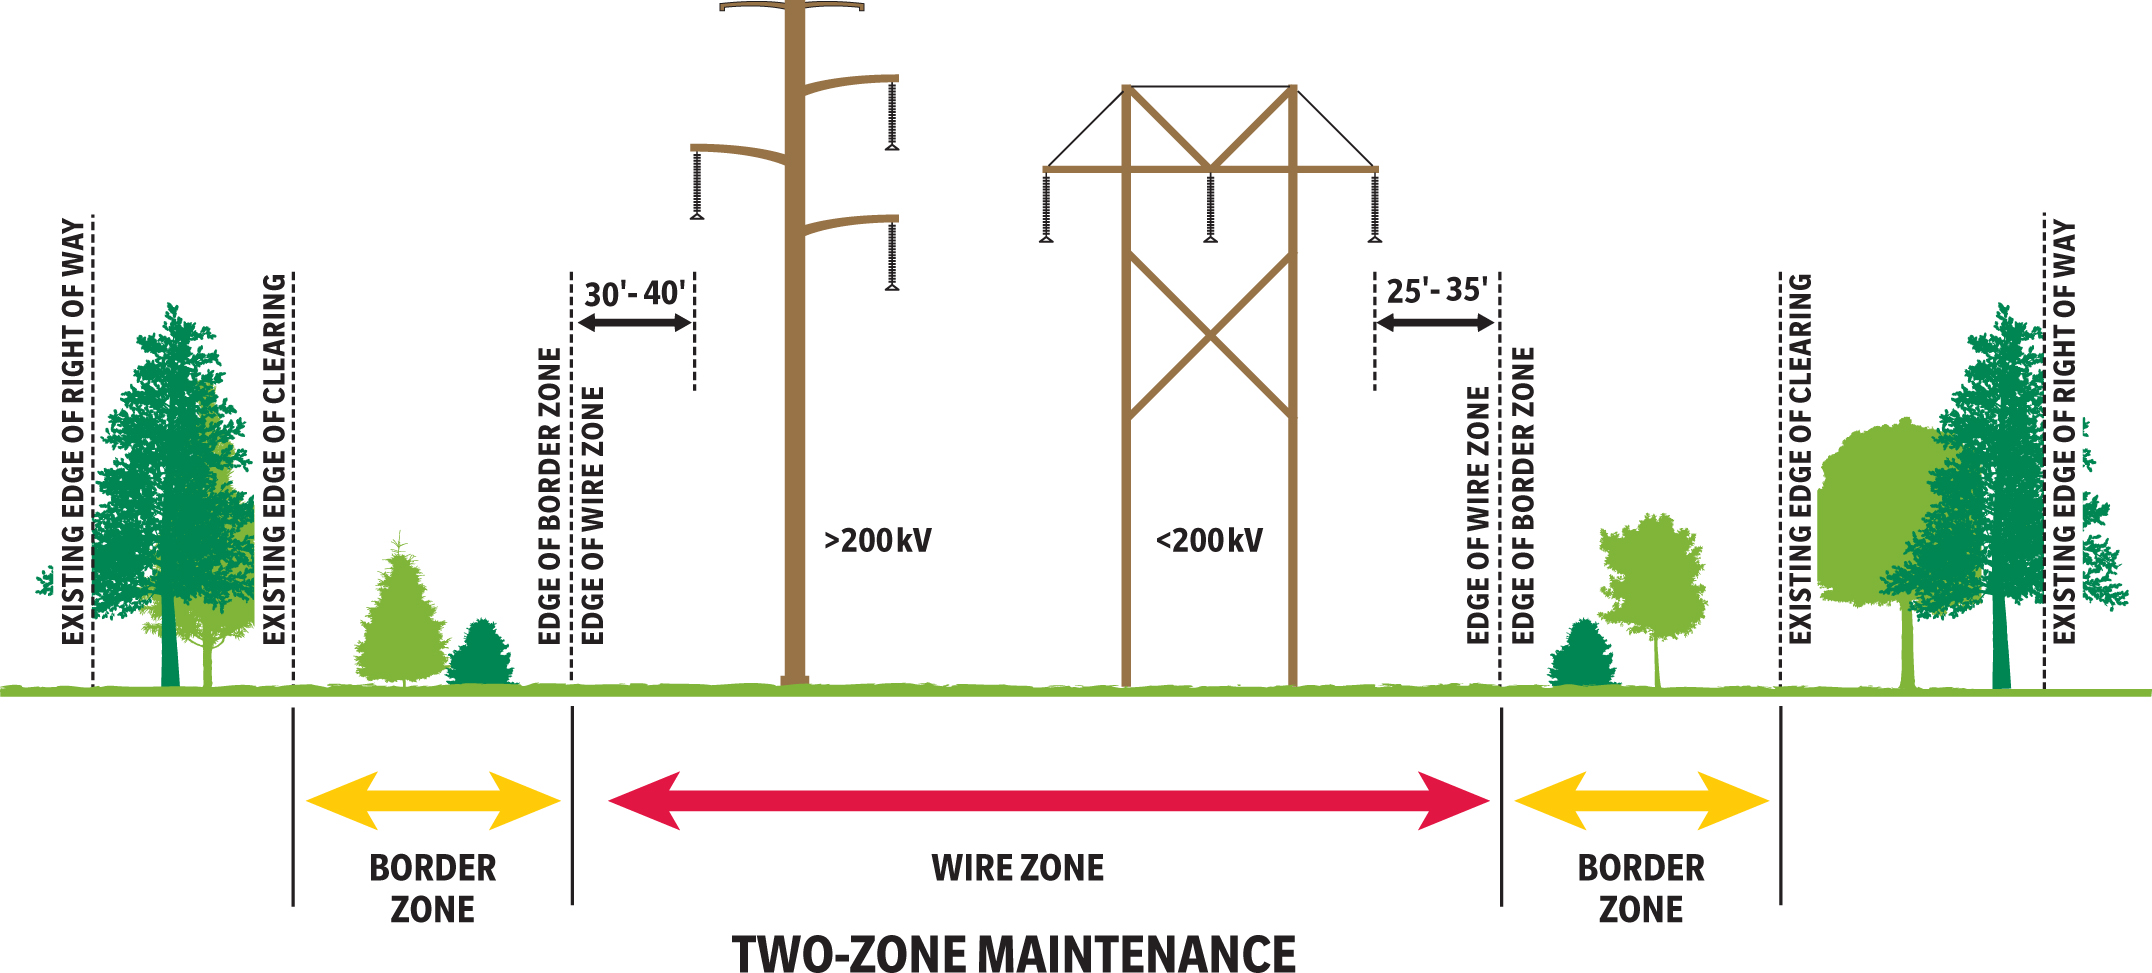 Diagram showing the two zone maintenance area along a transmission right of way